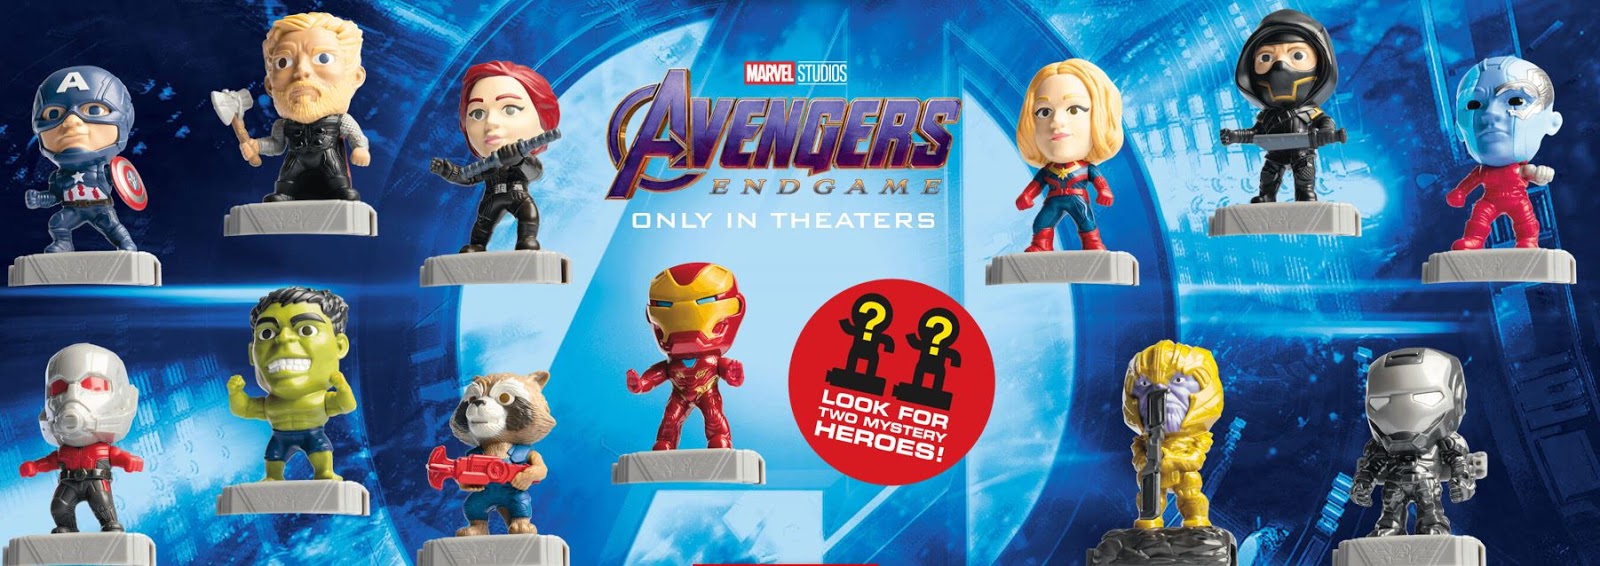 Choose Character Free ship 2019 Avengers End Game McDonald's Happy Meal toy 